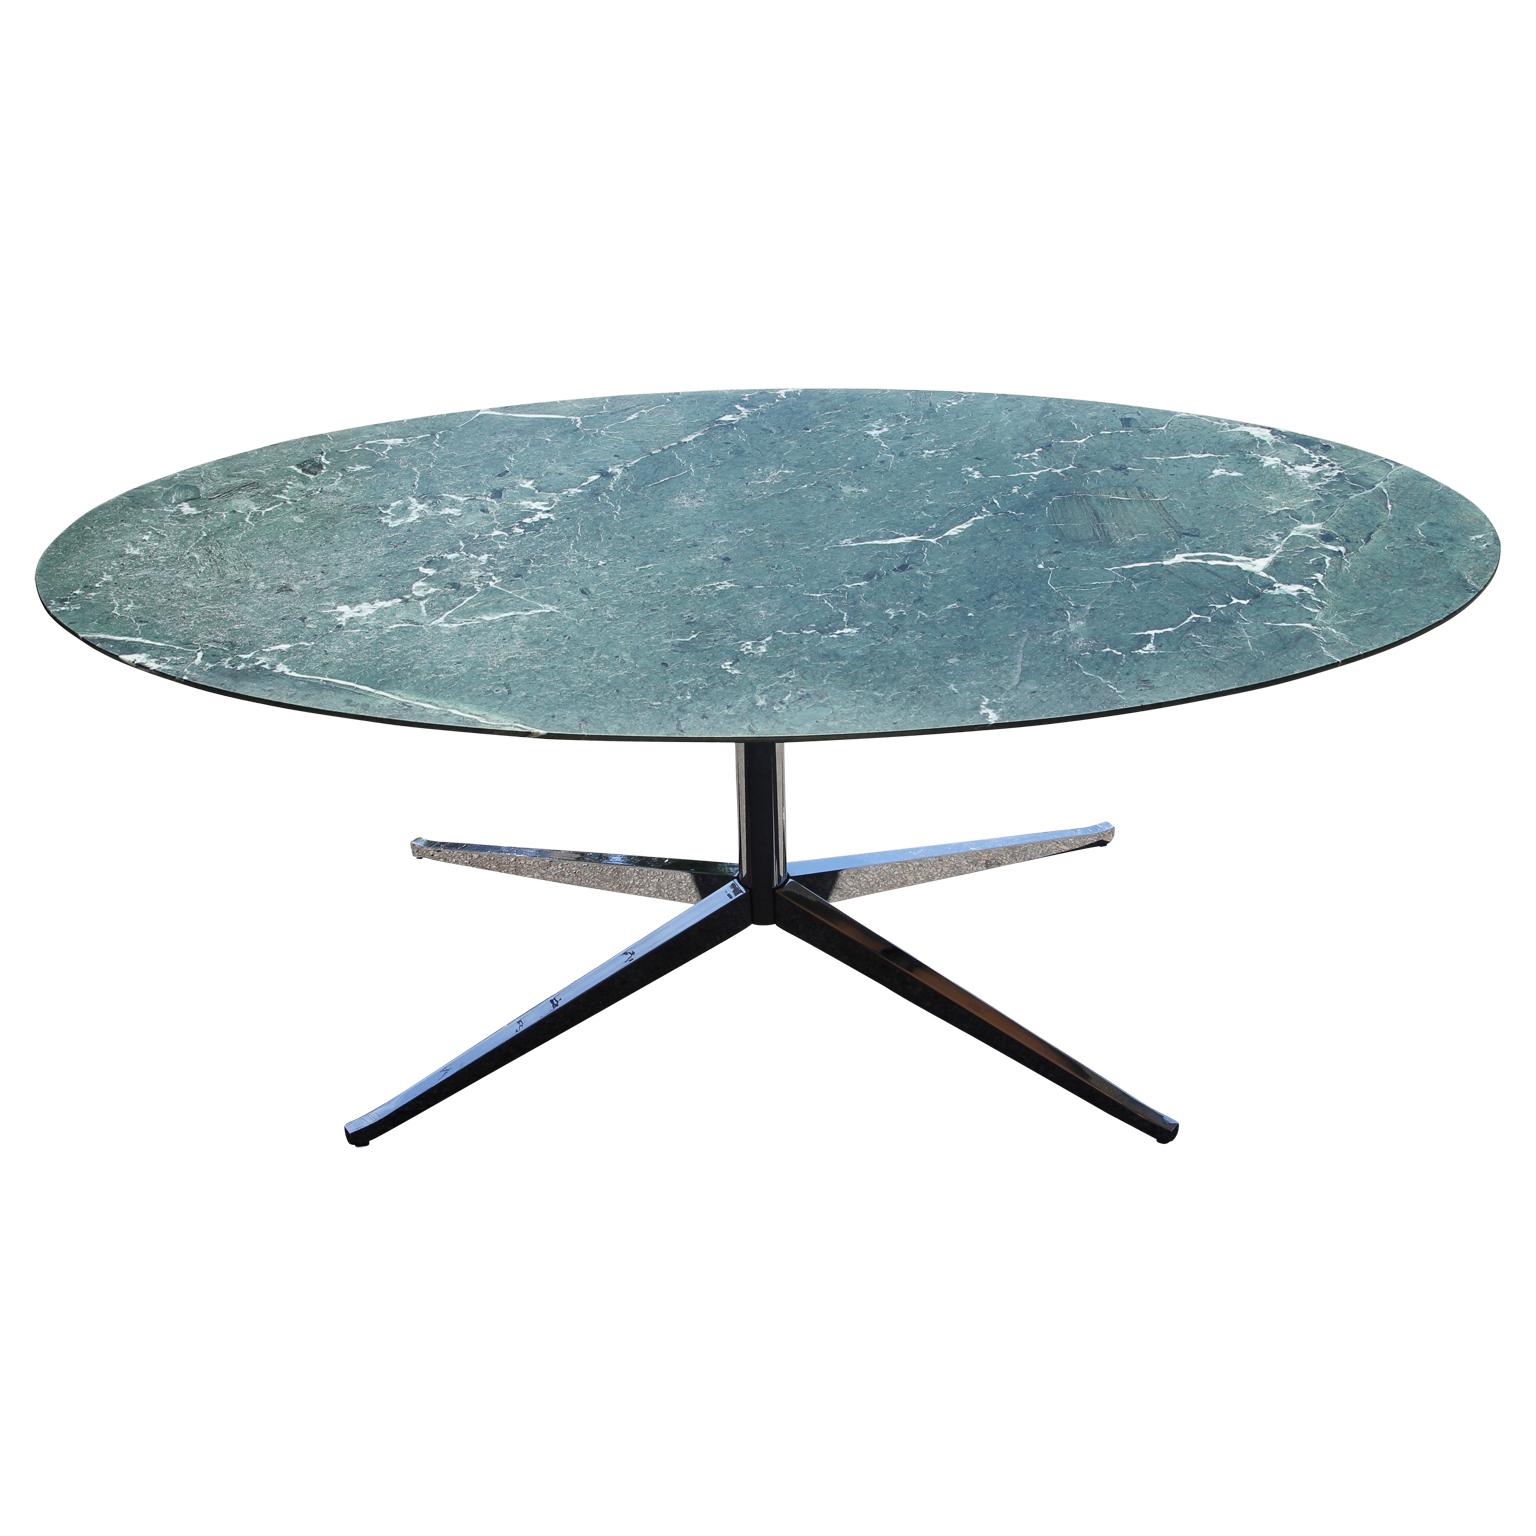 Large Knoll green marble oval top dining table with a unique green marble top. The table features a durable chrome base in a sleek modern design. The table is designed by Florence Knoll and is perfect for a dining table or conference table.
Top may